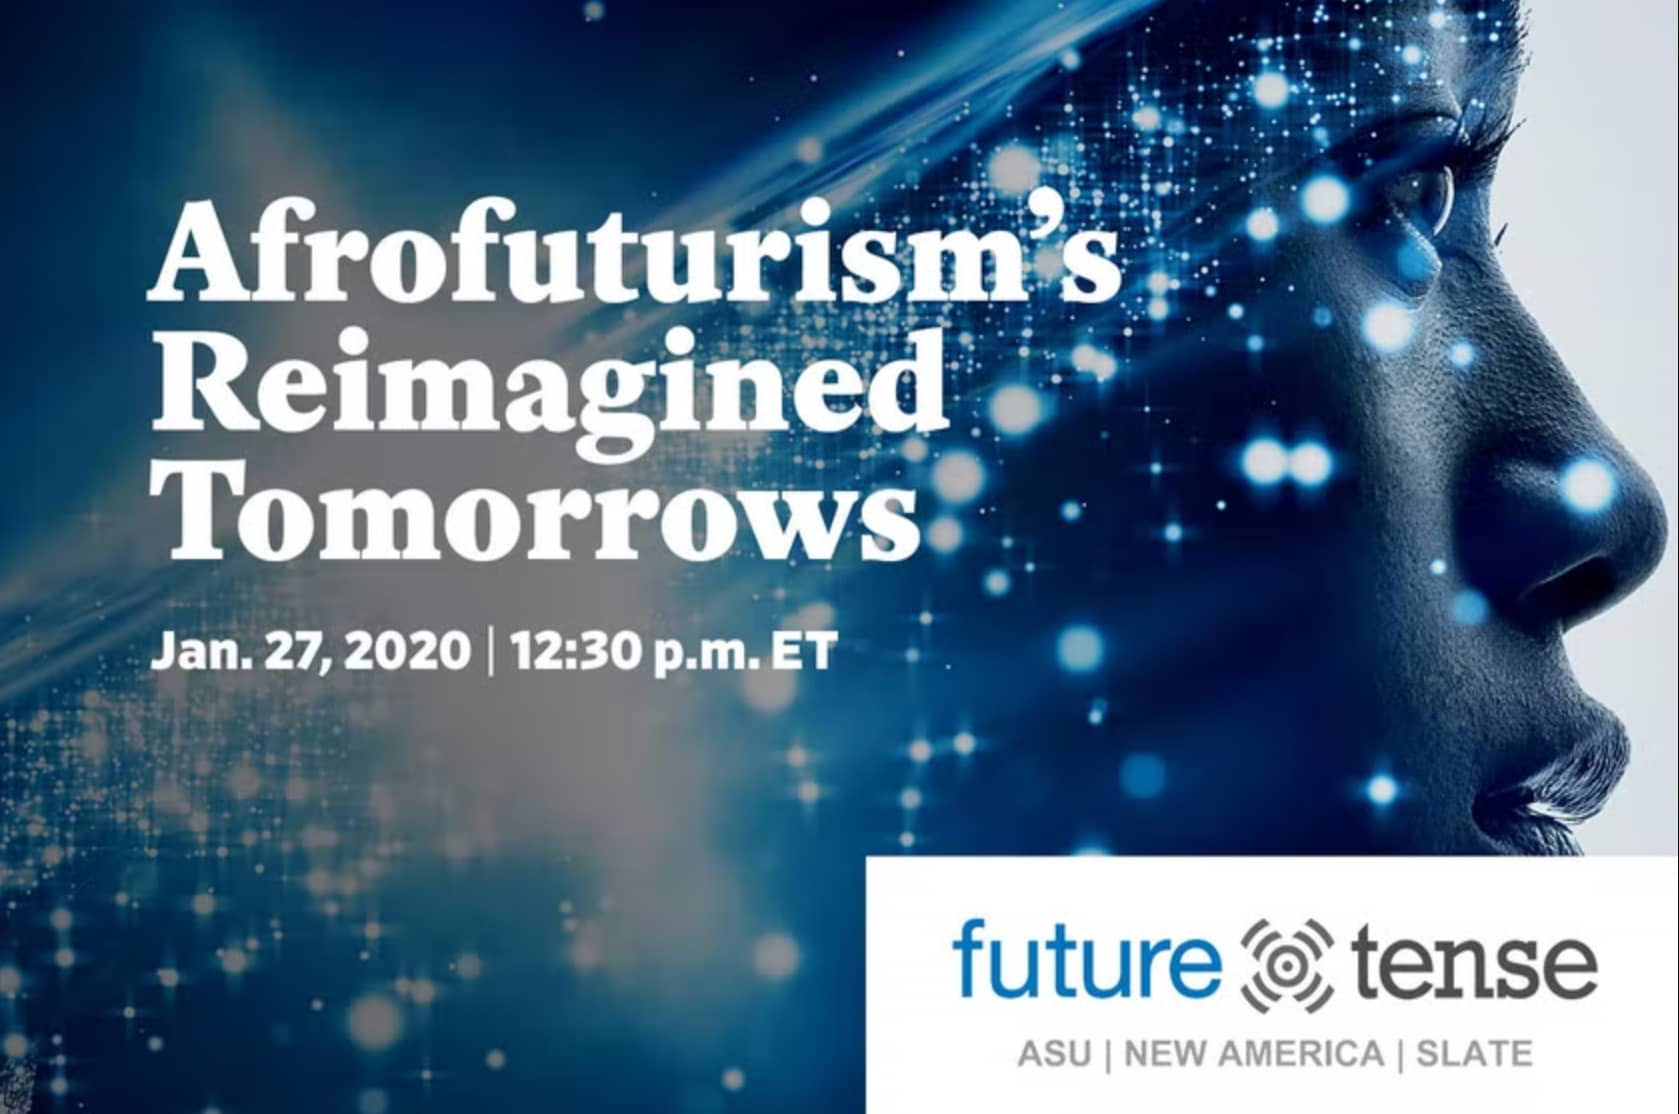 Founder Fabrice Guerrier Speaks on Afrofuturism’s Reimagined Tomorrows Event by Slate Magazine